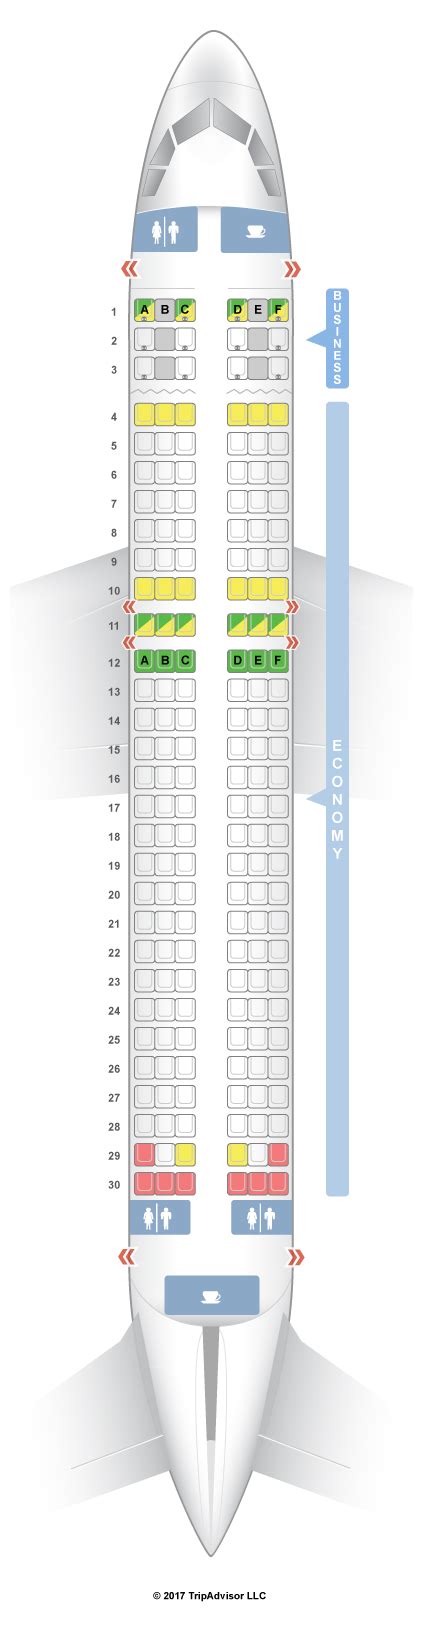 Brussels Airlines A330 Seat Map